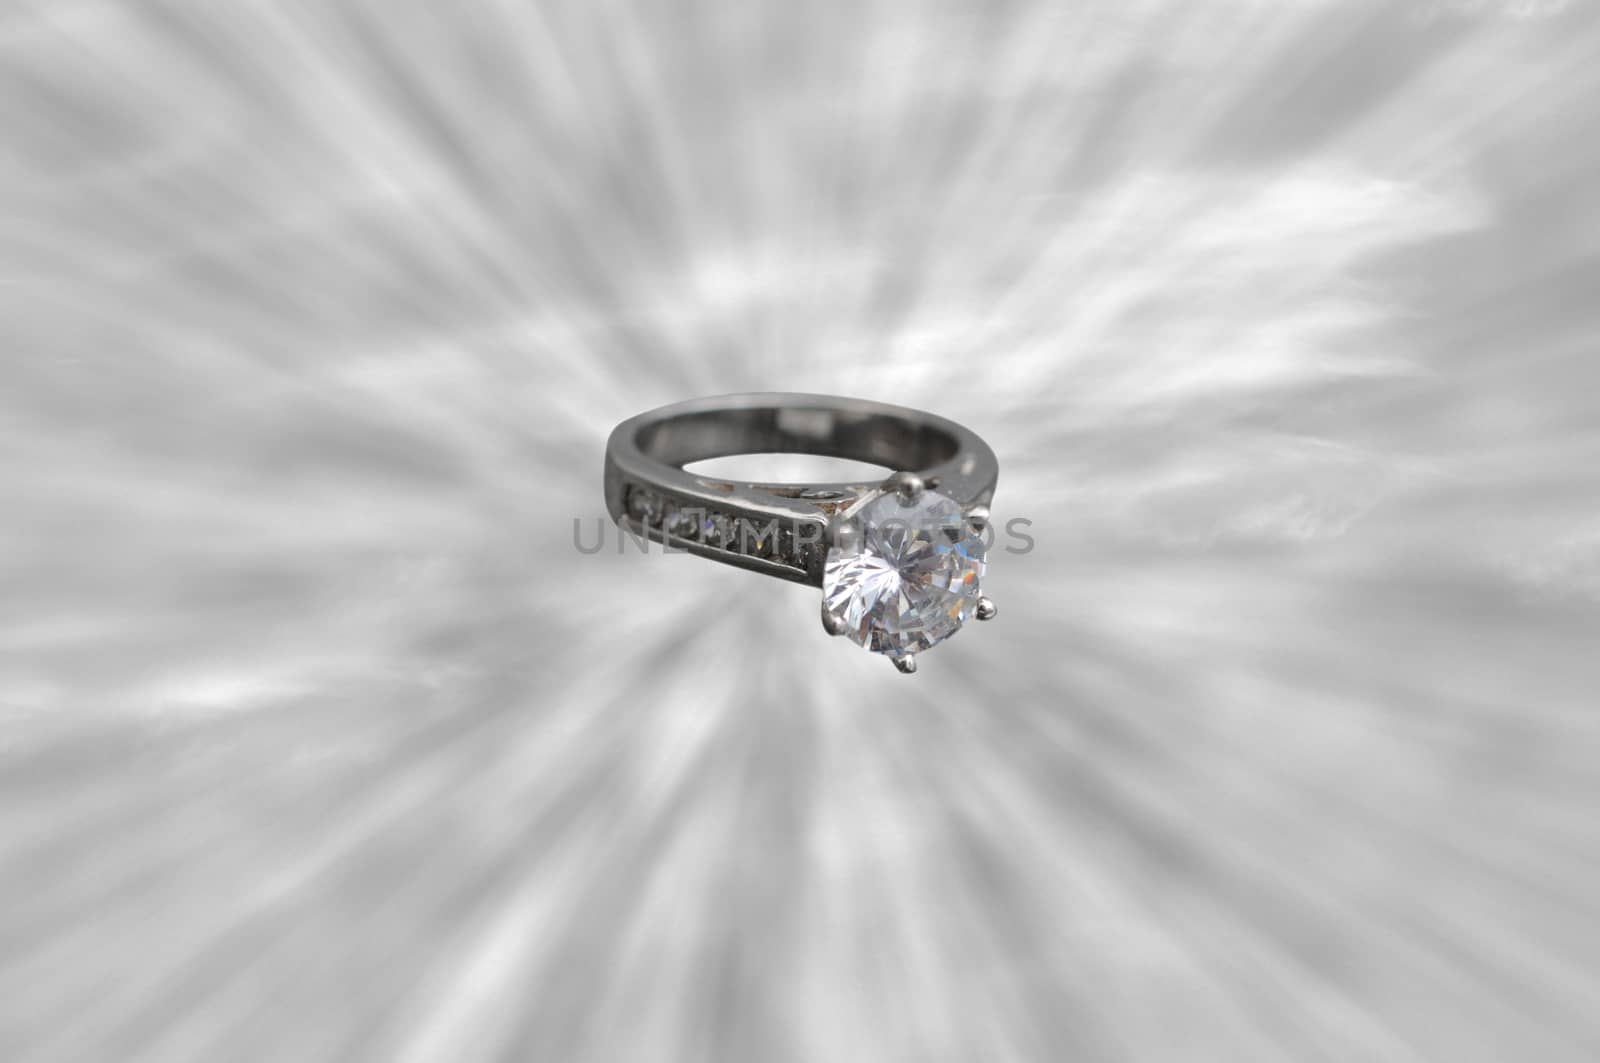 Engagement ring by ftlaudgirl